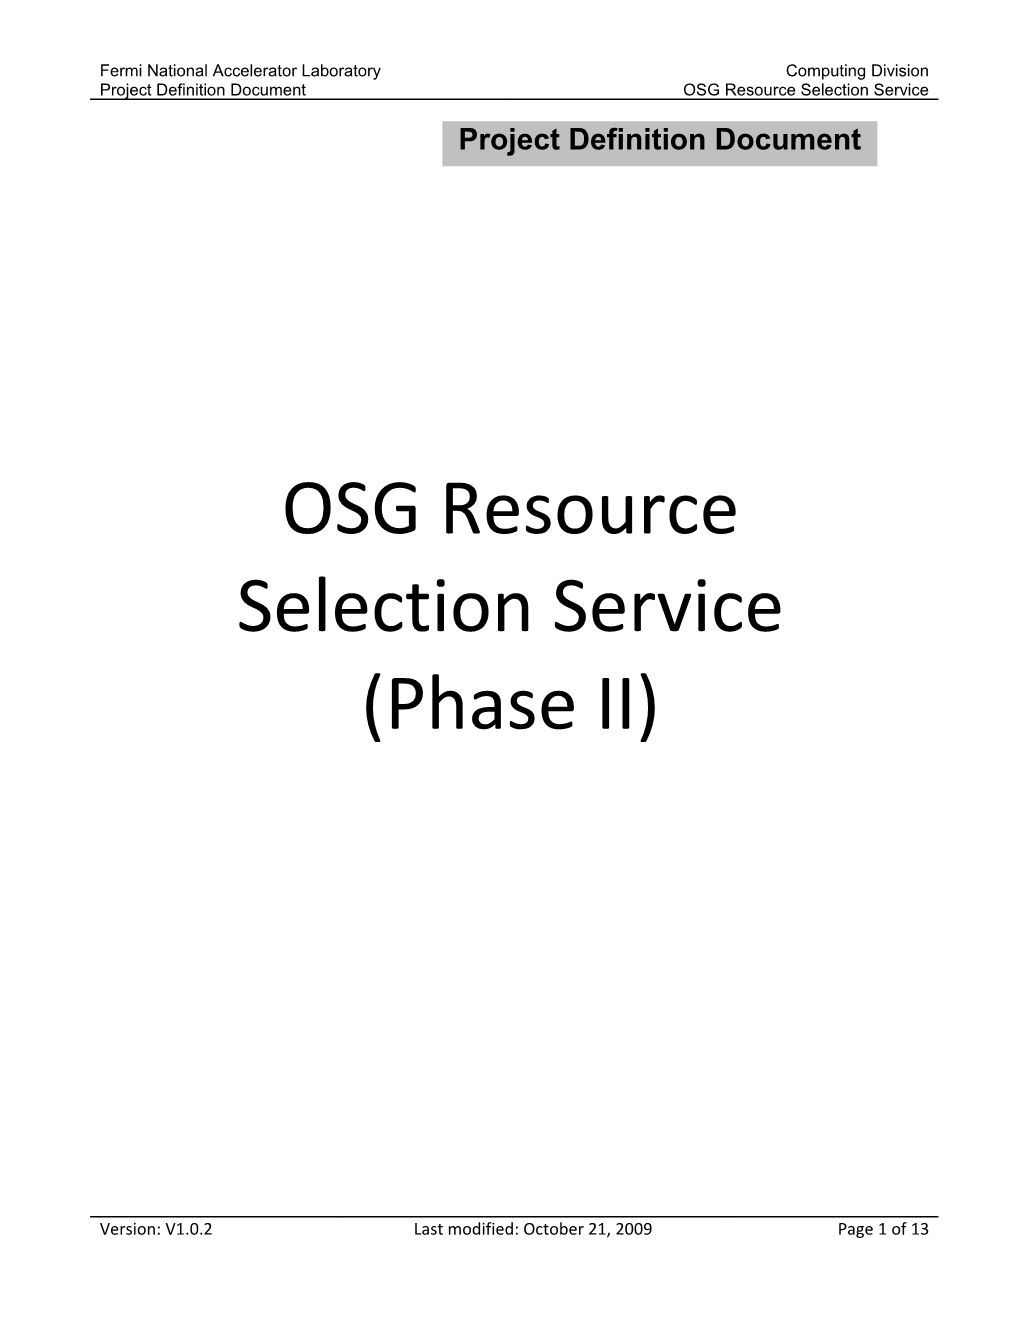 OSG Resource Selection Service